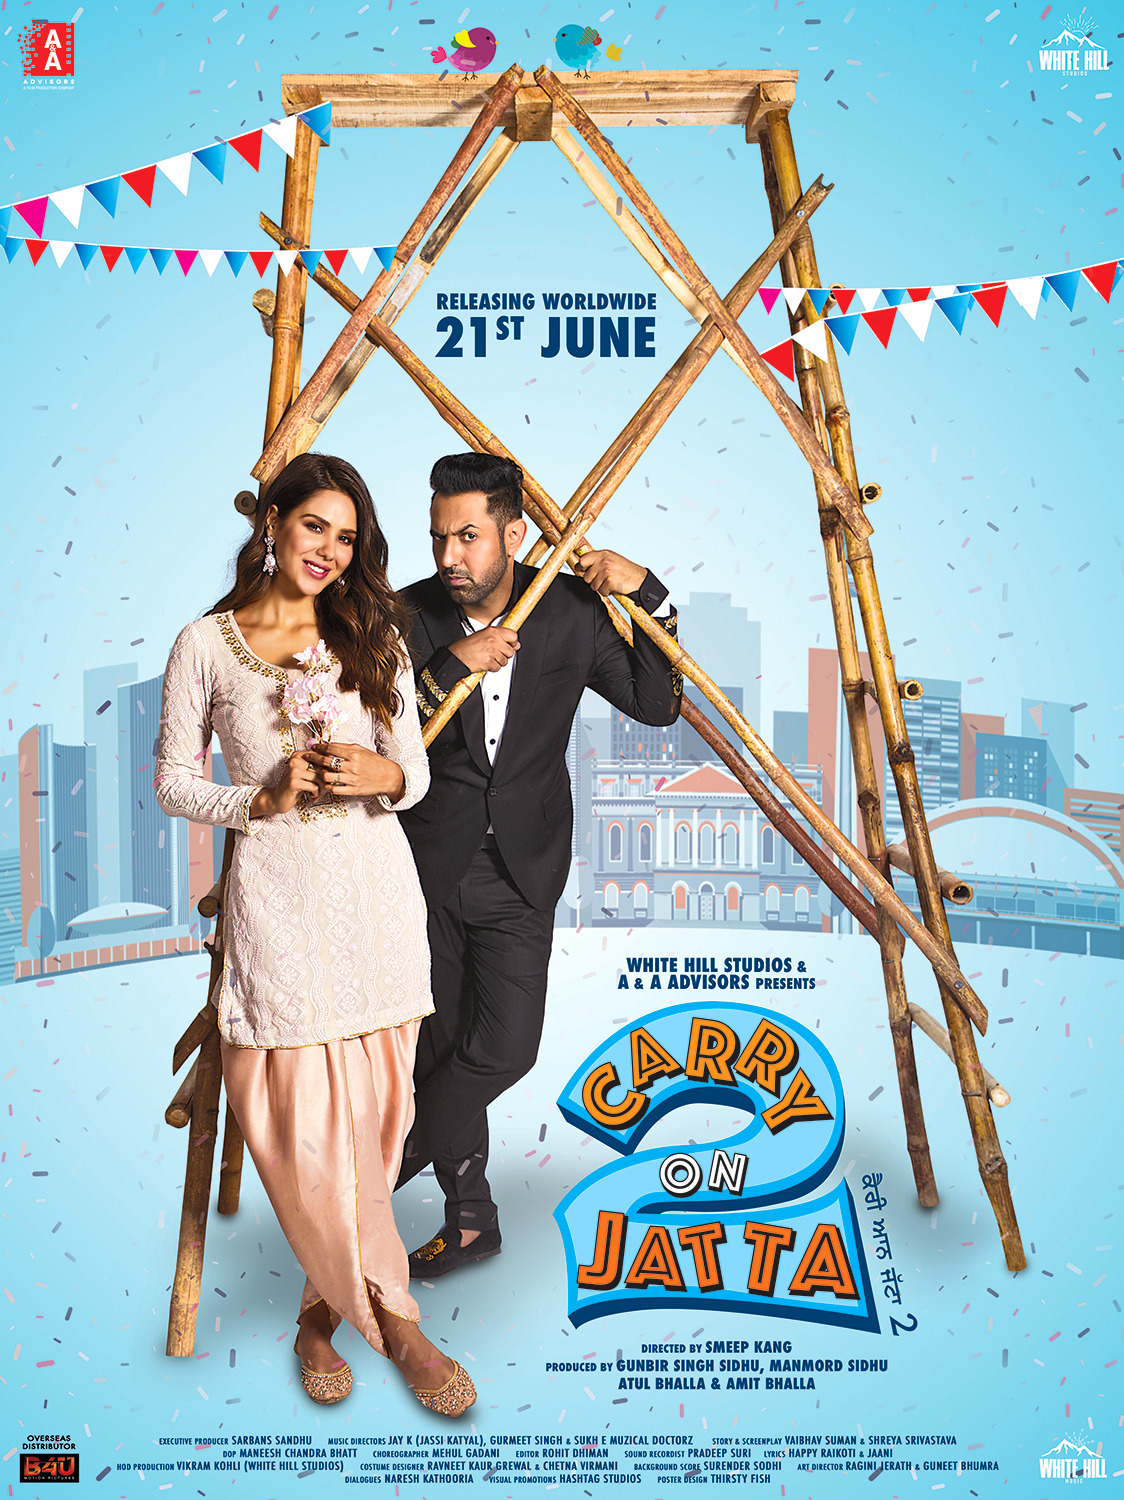 Extra Large Movie Poster Image for Carry on Jatta 2 (#3 of 3)